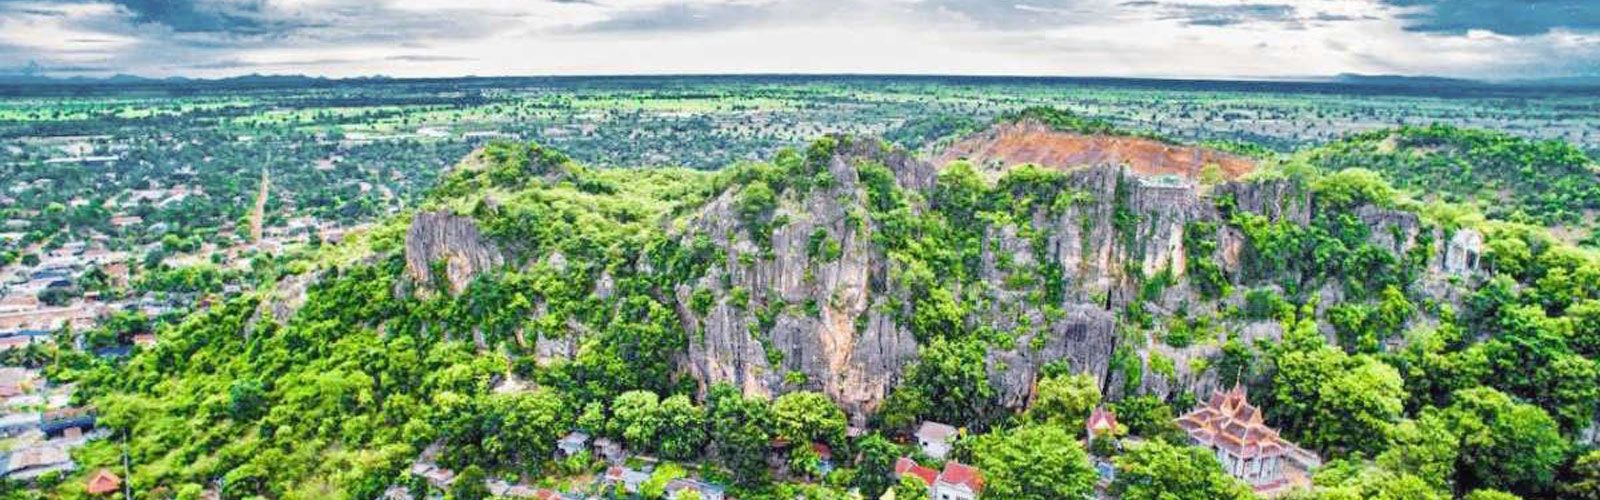 Banteay Meanchey Holidays | Asianventure Tours